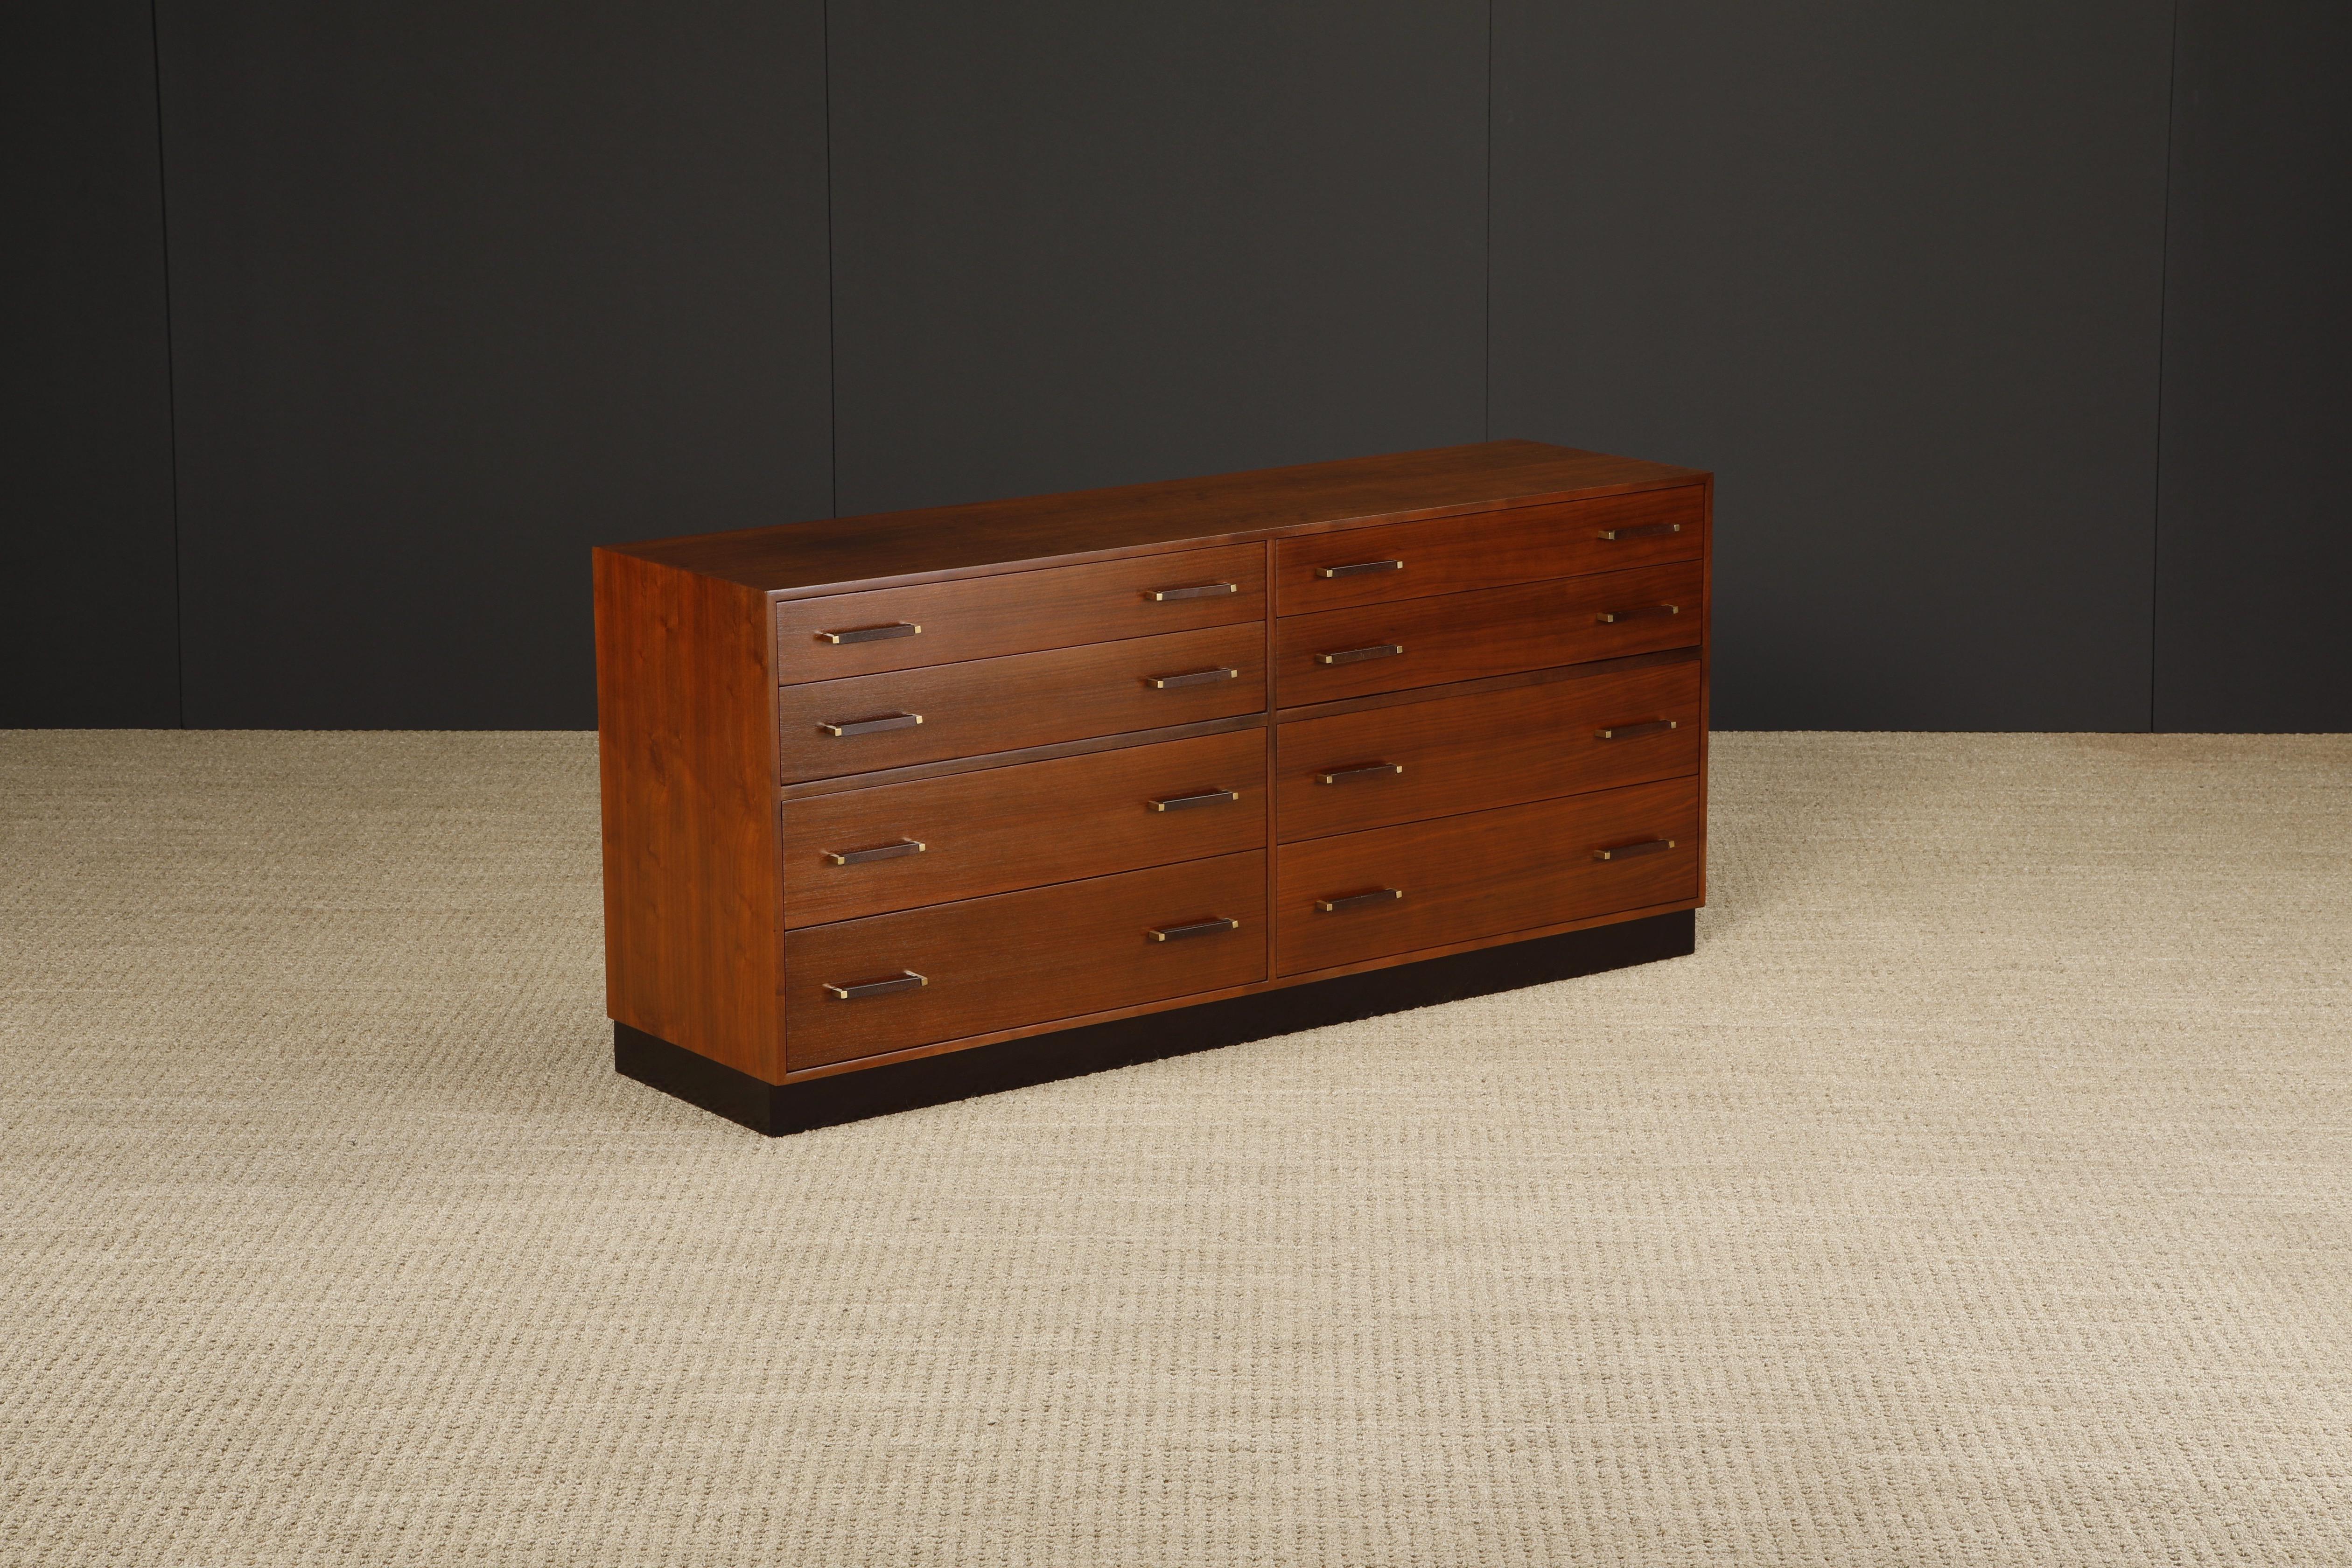 American Refinished Walnut and Brass Dresser by Edward Wormley for Dunbar, C 1965, Signed